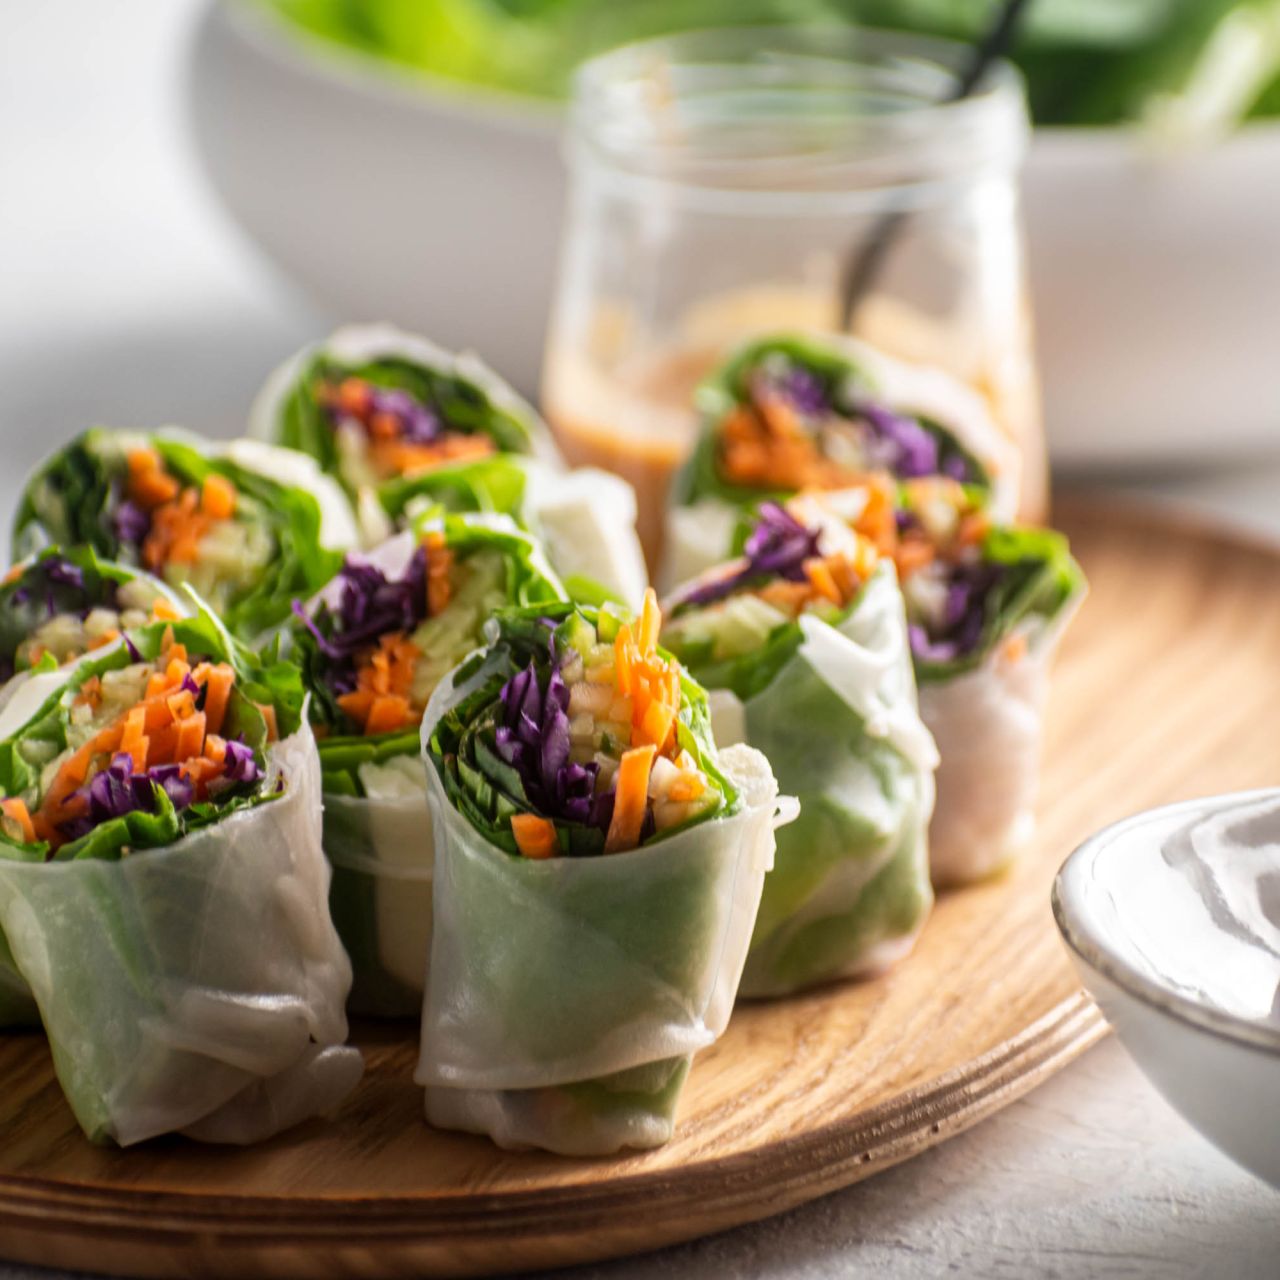 How To Make Vegetable Rice Paper Rolls - A Tasty Kitchen